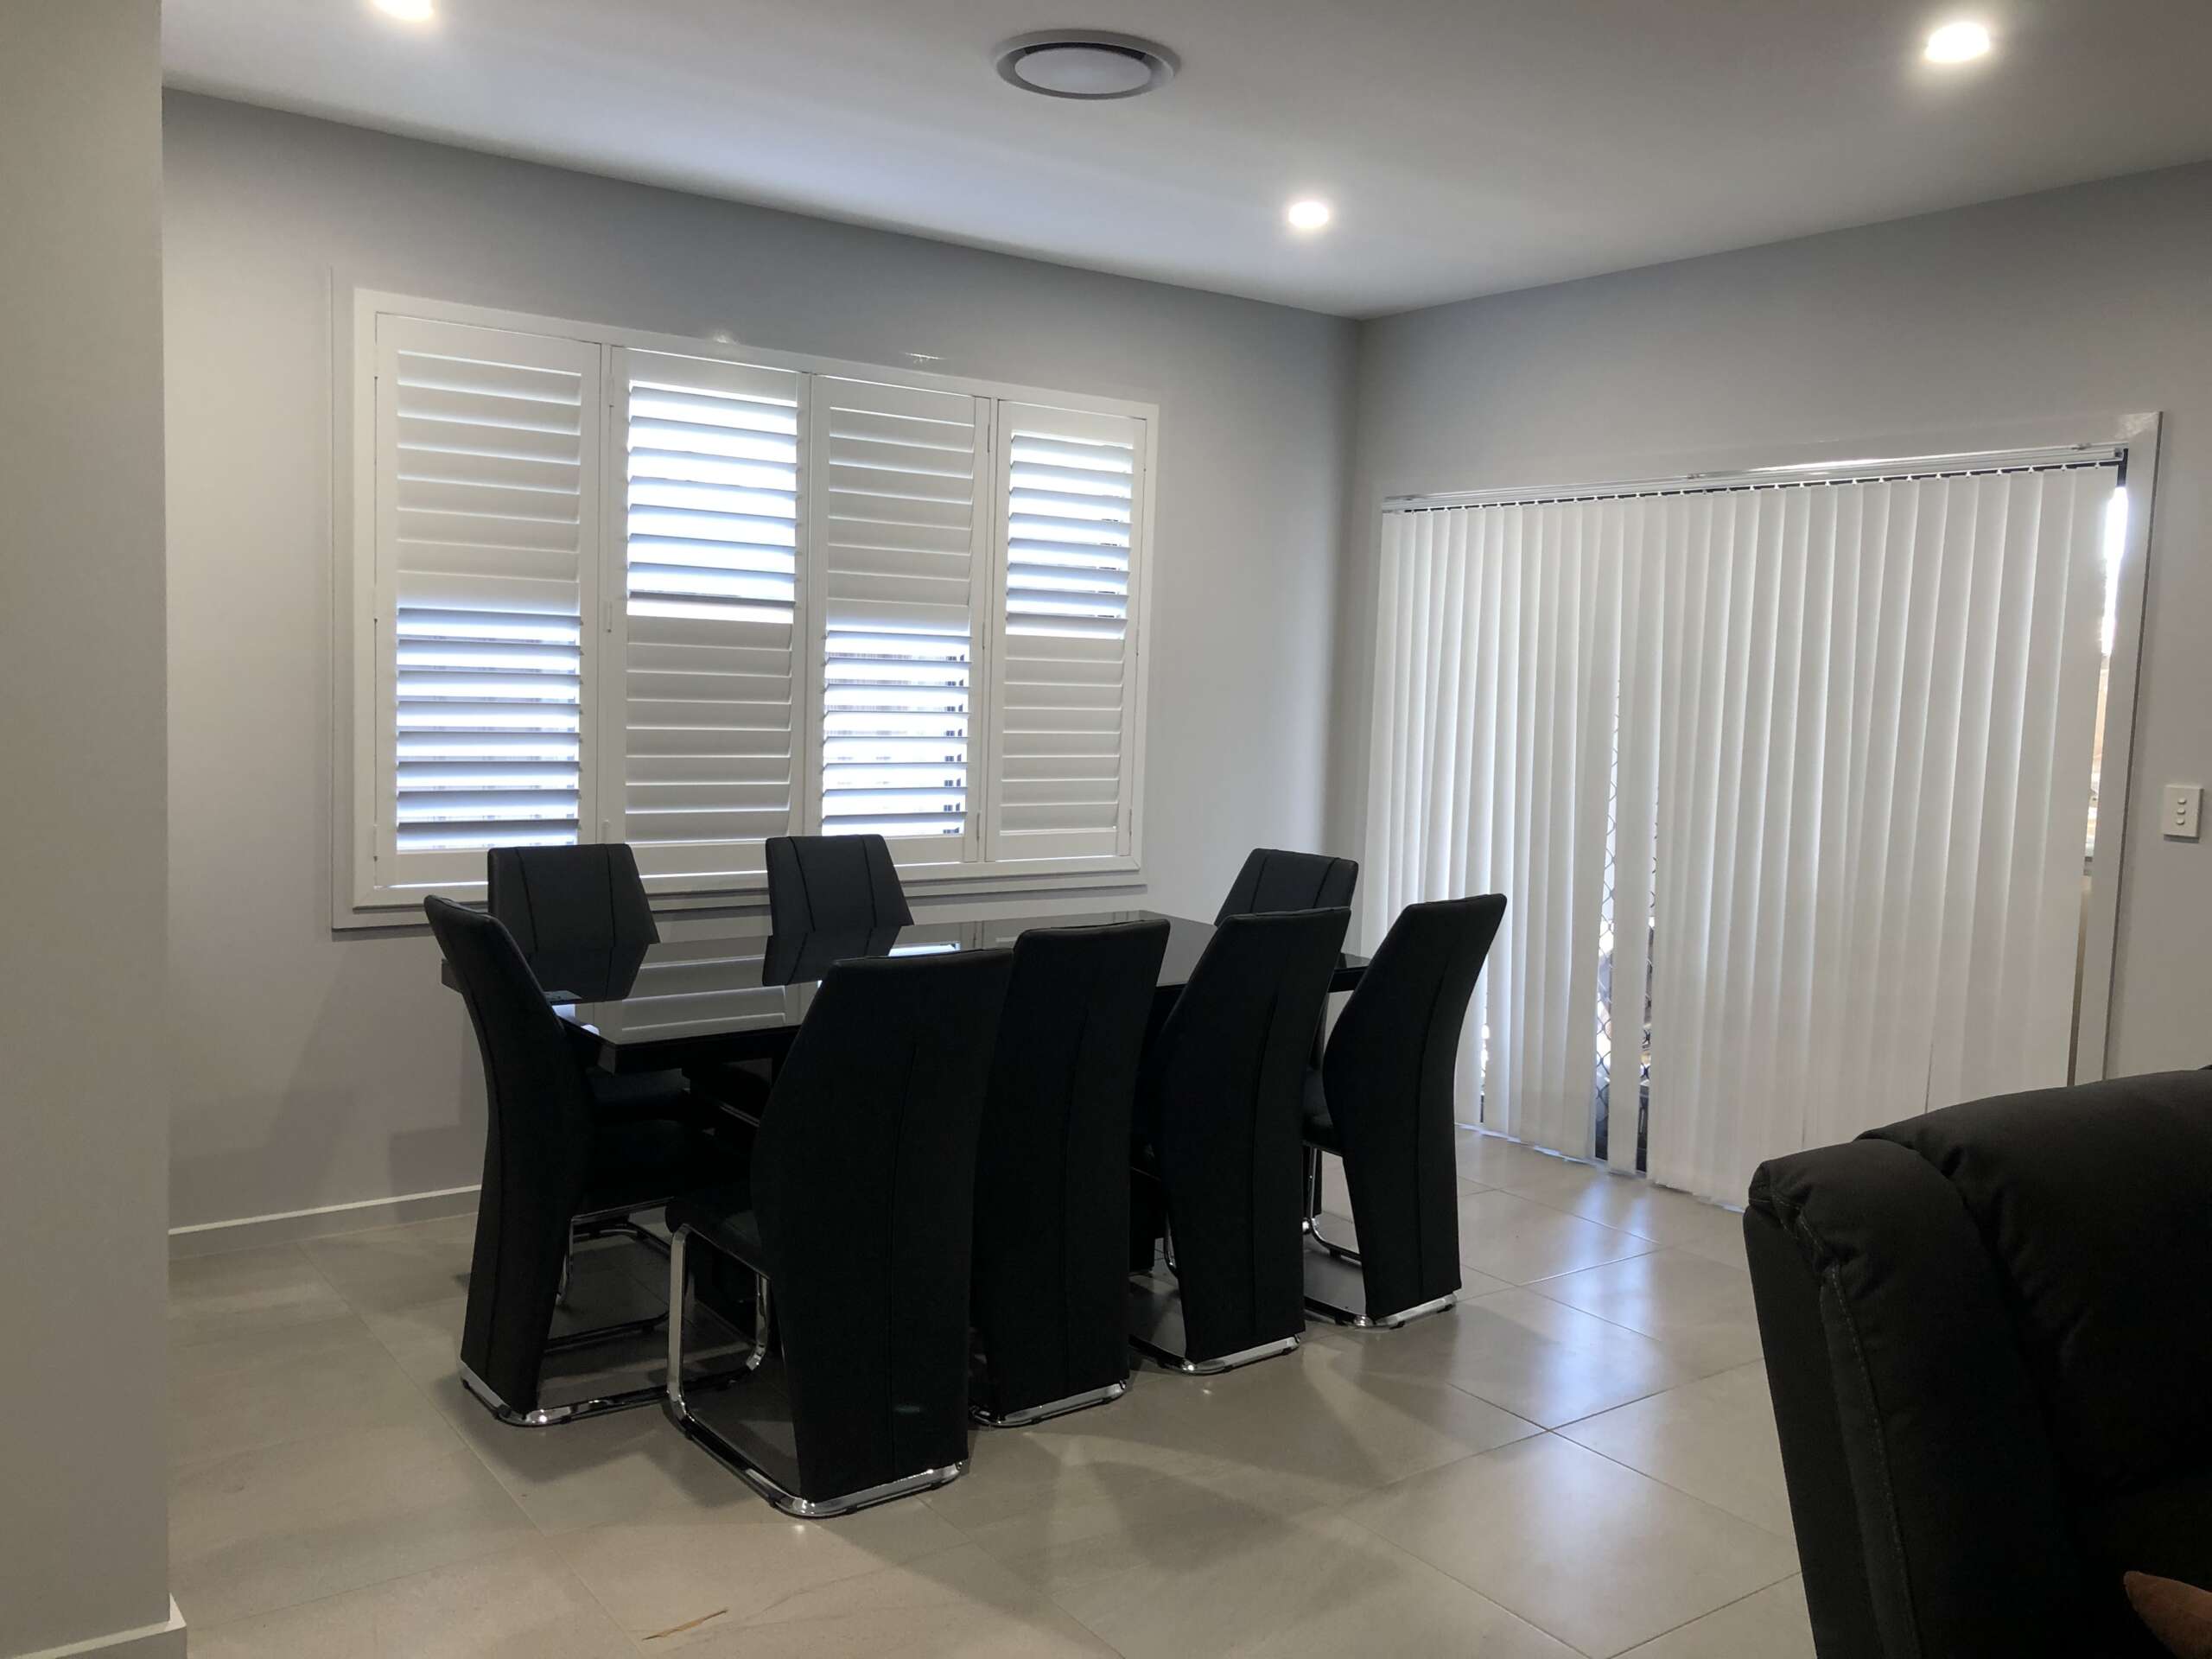 shutters and blinds